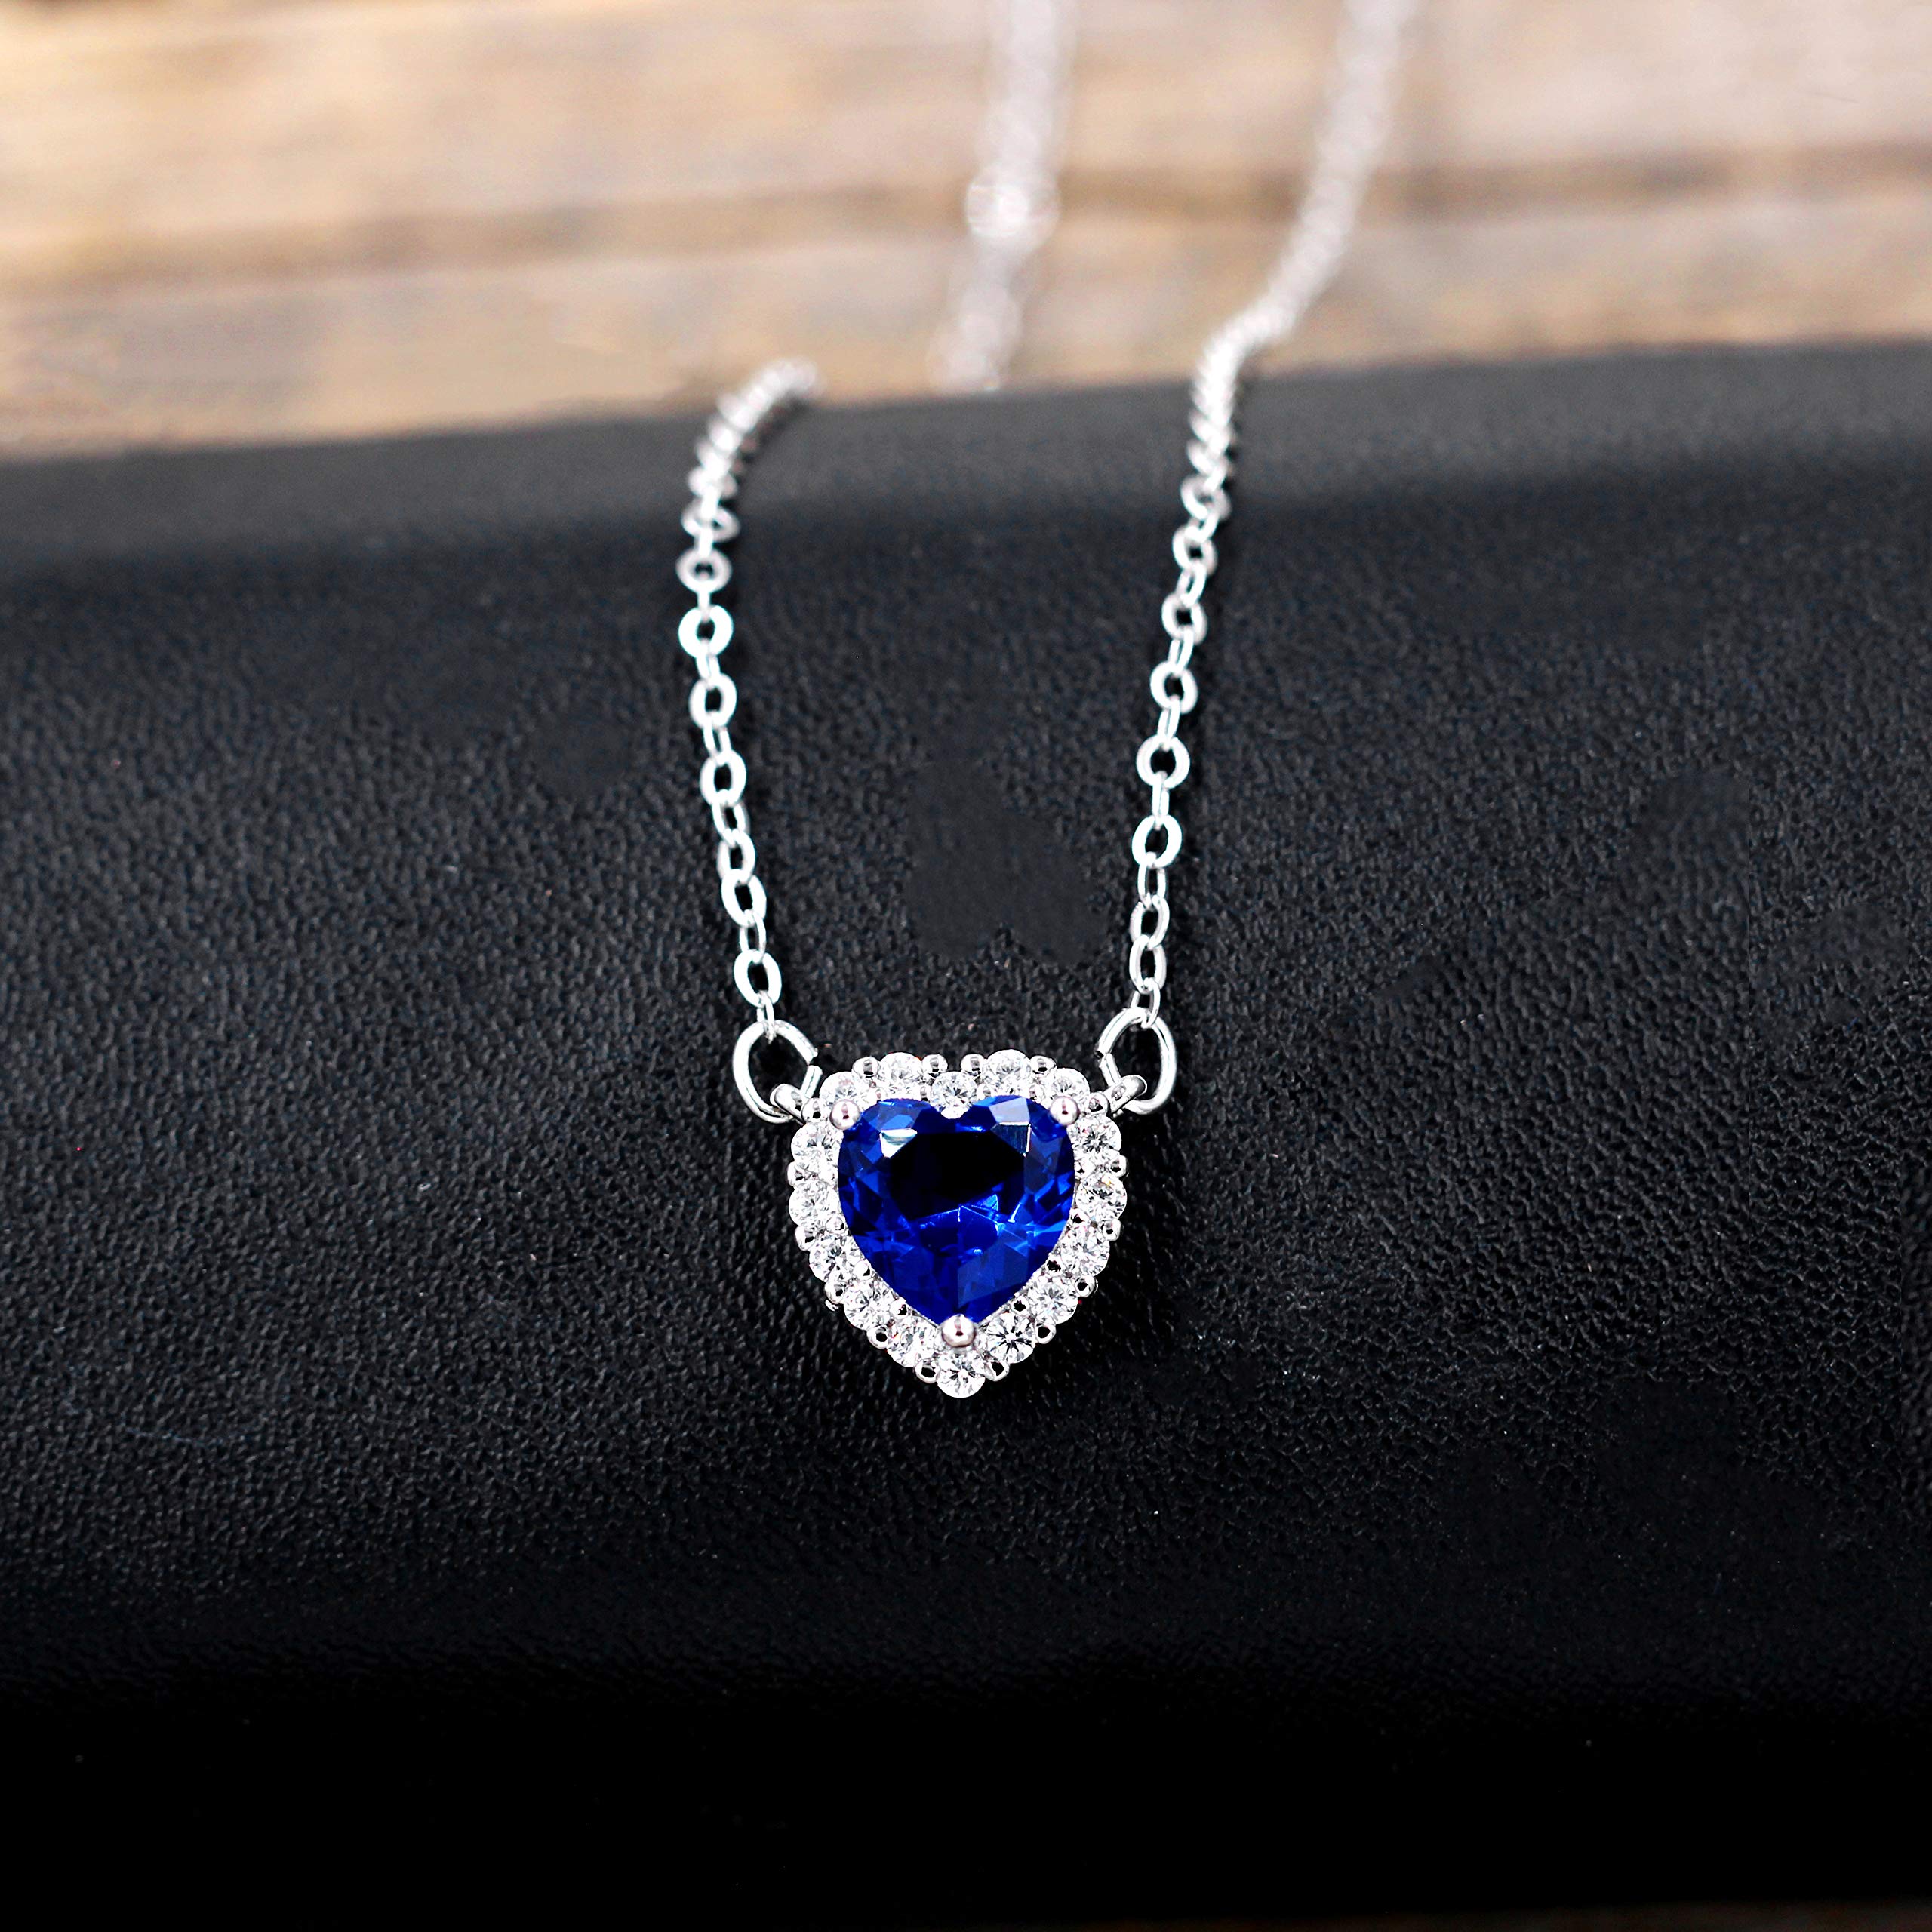 Uloveido Platinum Plated Titanic Ocean Blue Heart Pendant Crystal Choker Necklace for Women Girls Mother's Day Jewelry Gifts Y893